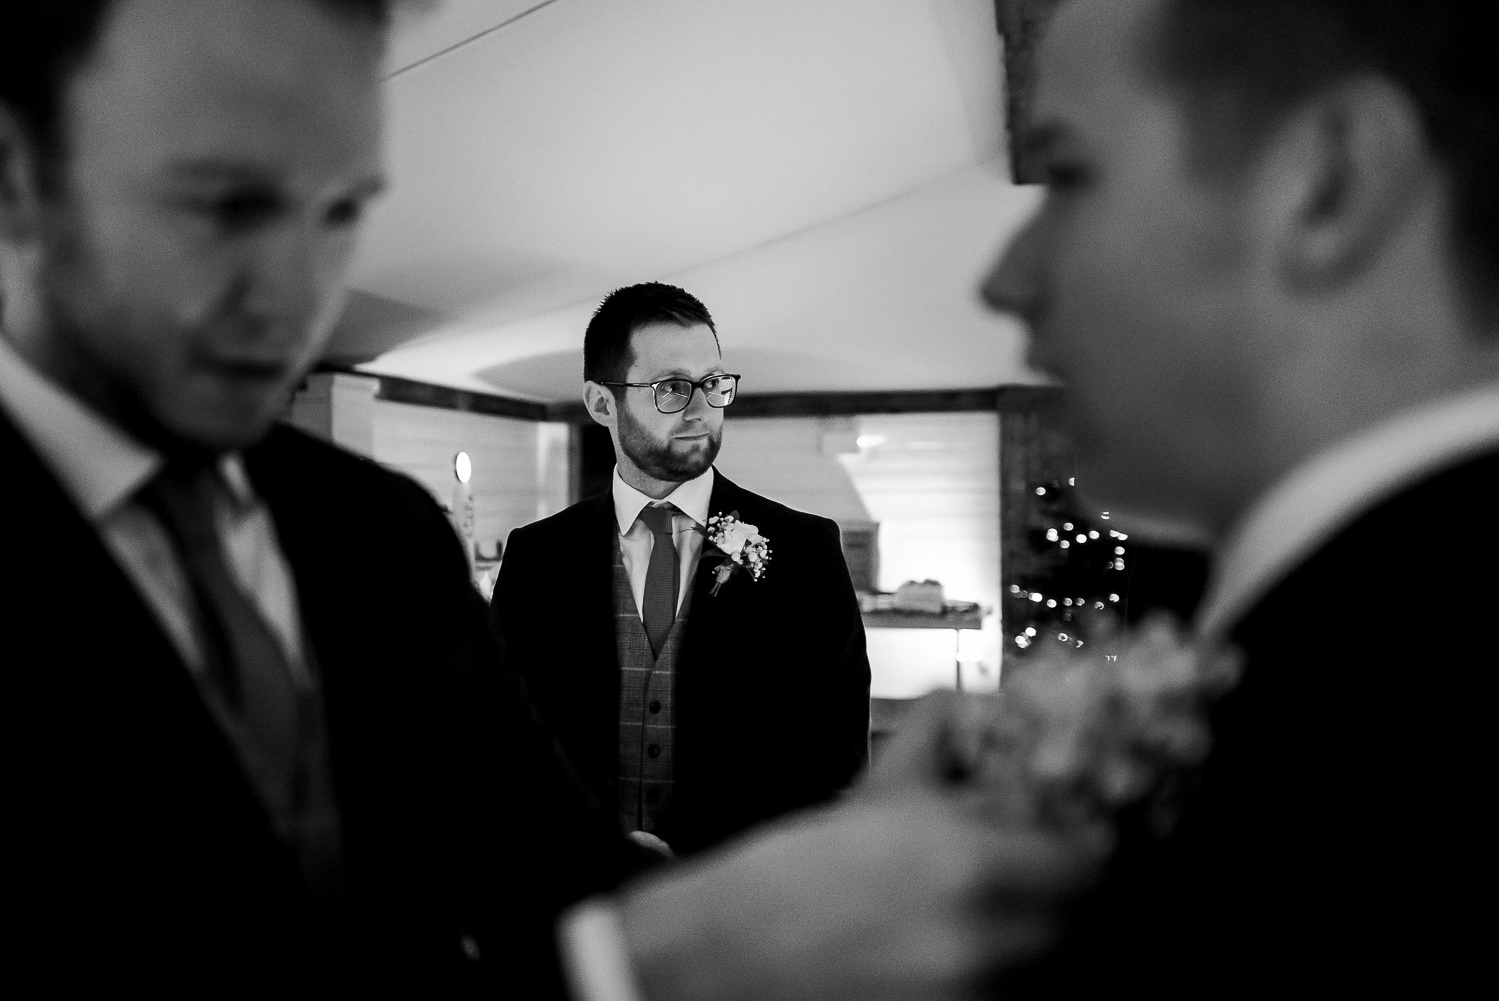 Groom and groomsmen having their button holes put on